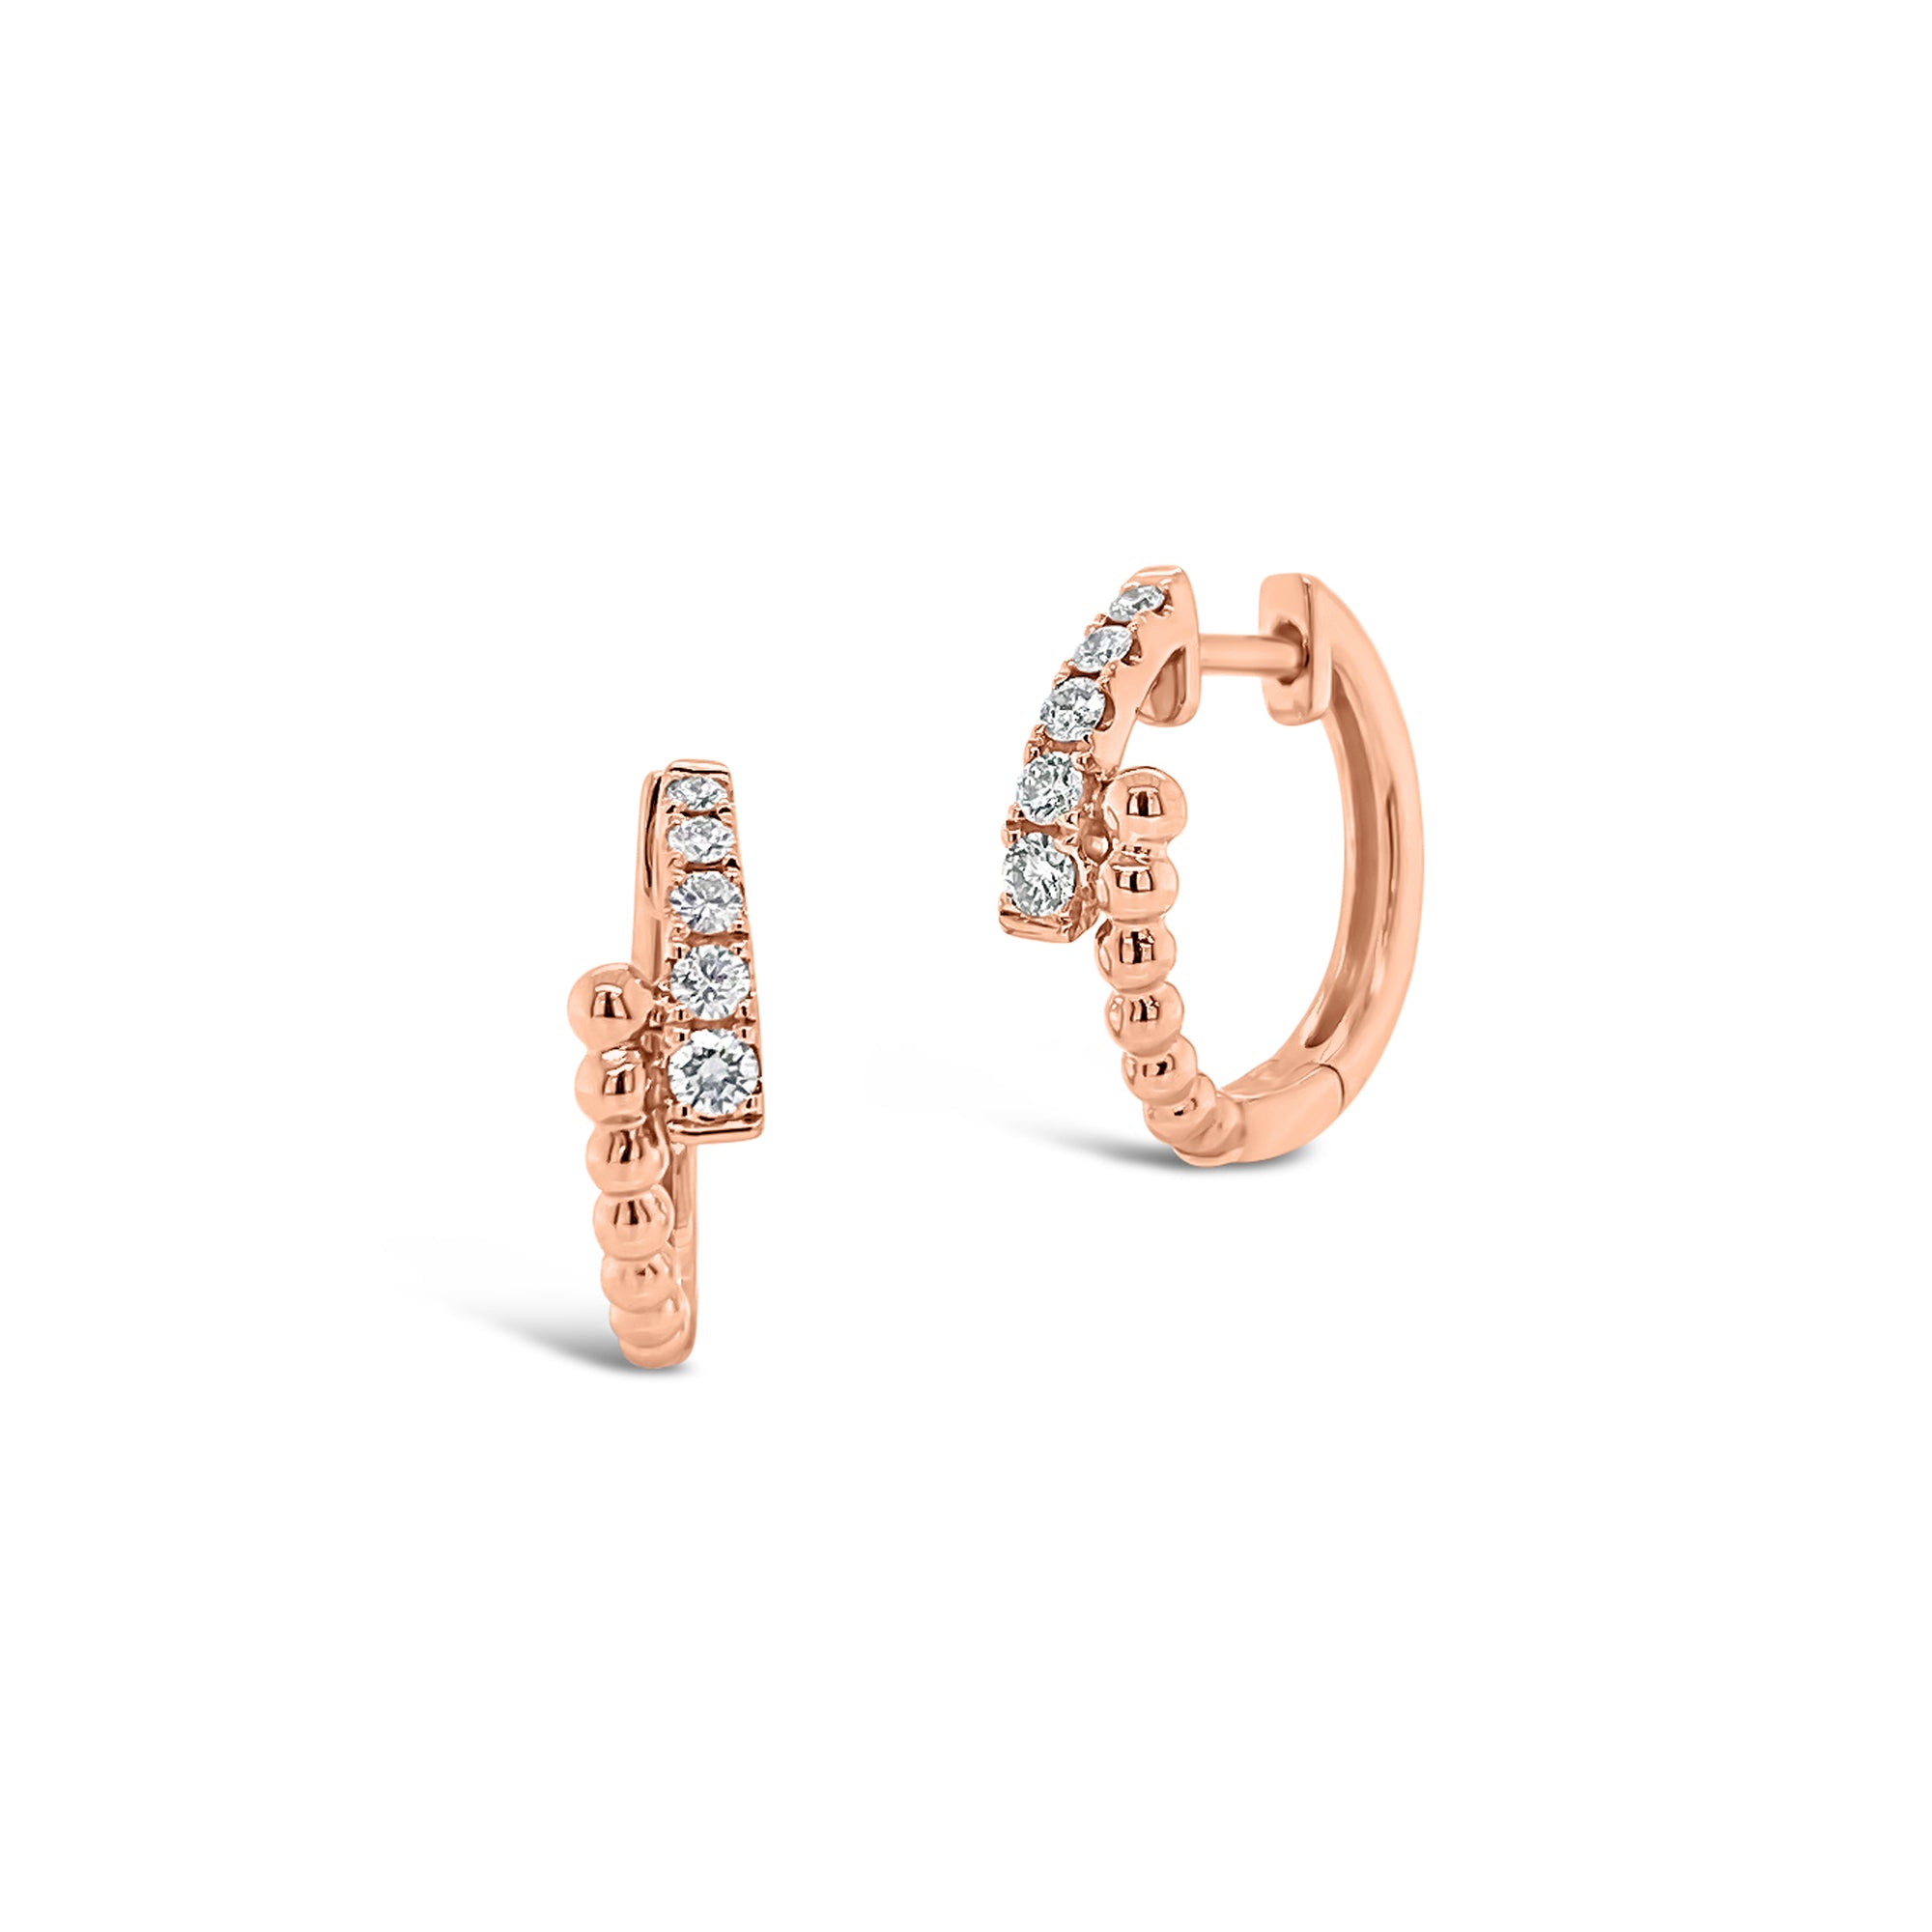 Diamond & Beaded Gold Crossover Huggie Earrings -18K white gold weighing 2.87 grams  -10 round diamonds totaling 0.19 carats